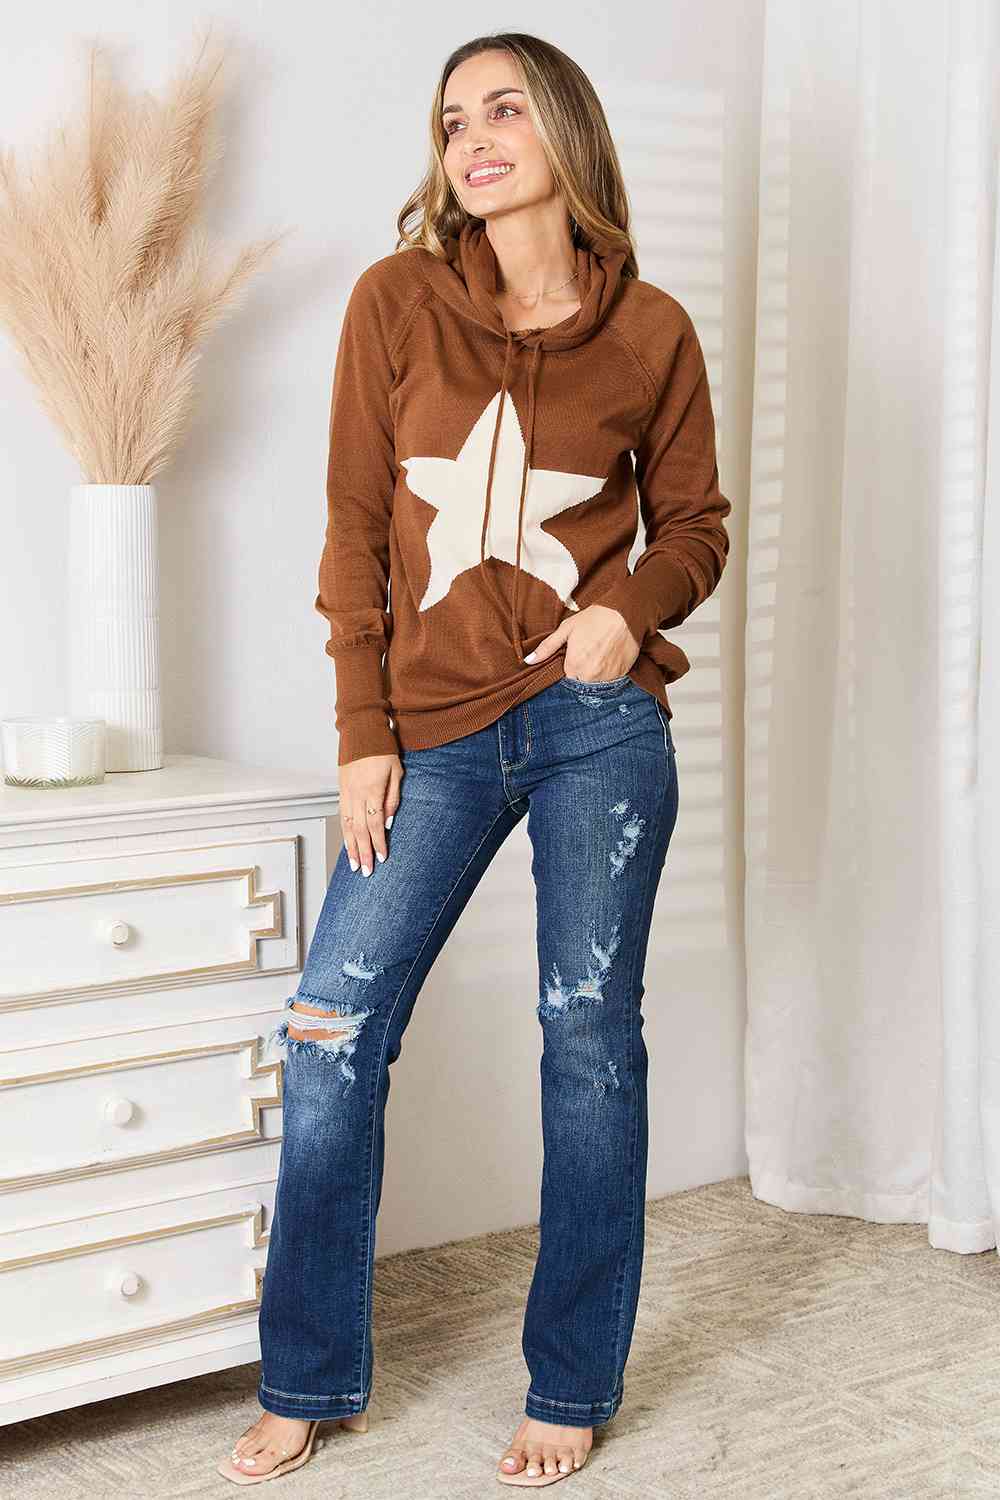 TatSwag Full Size Star Graphic Hooded Sweater